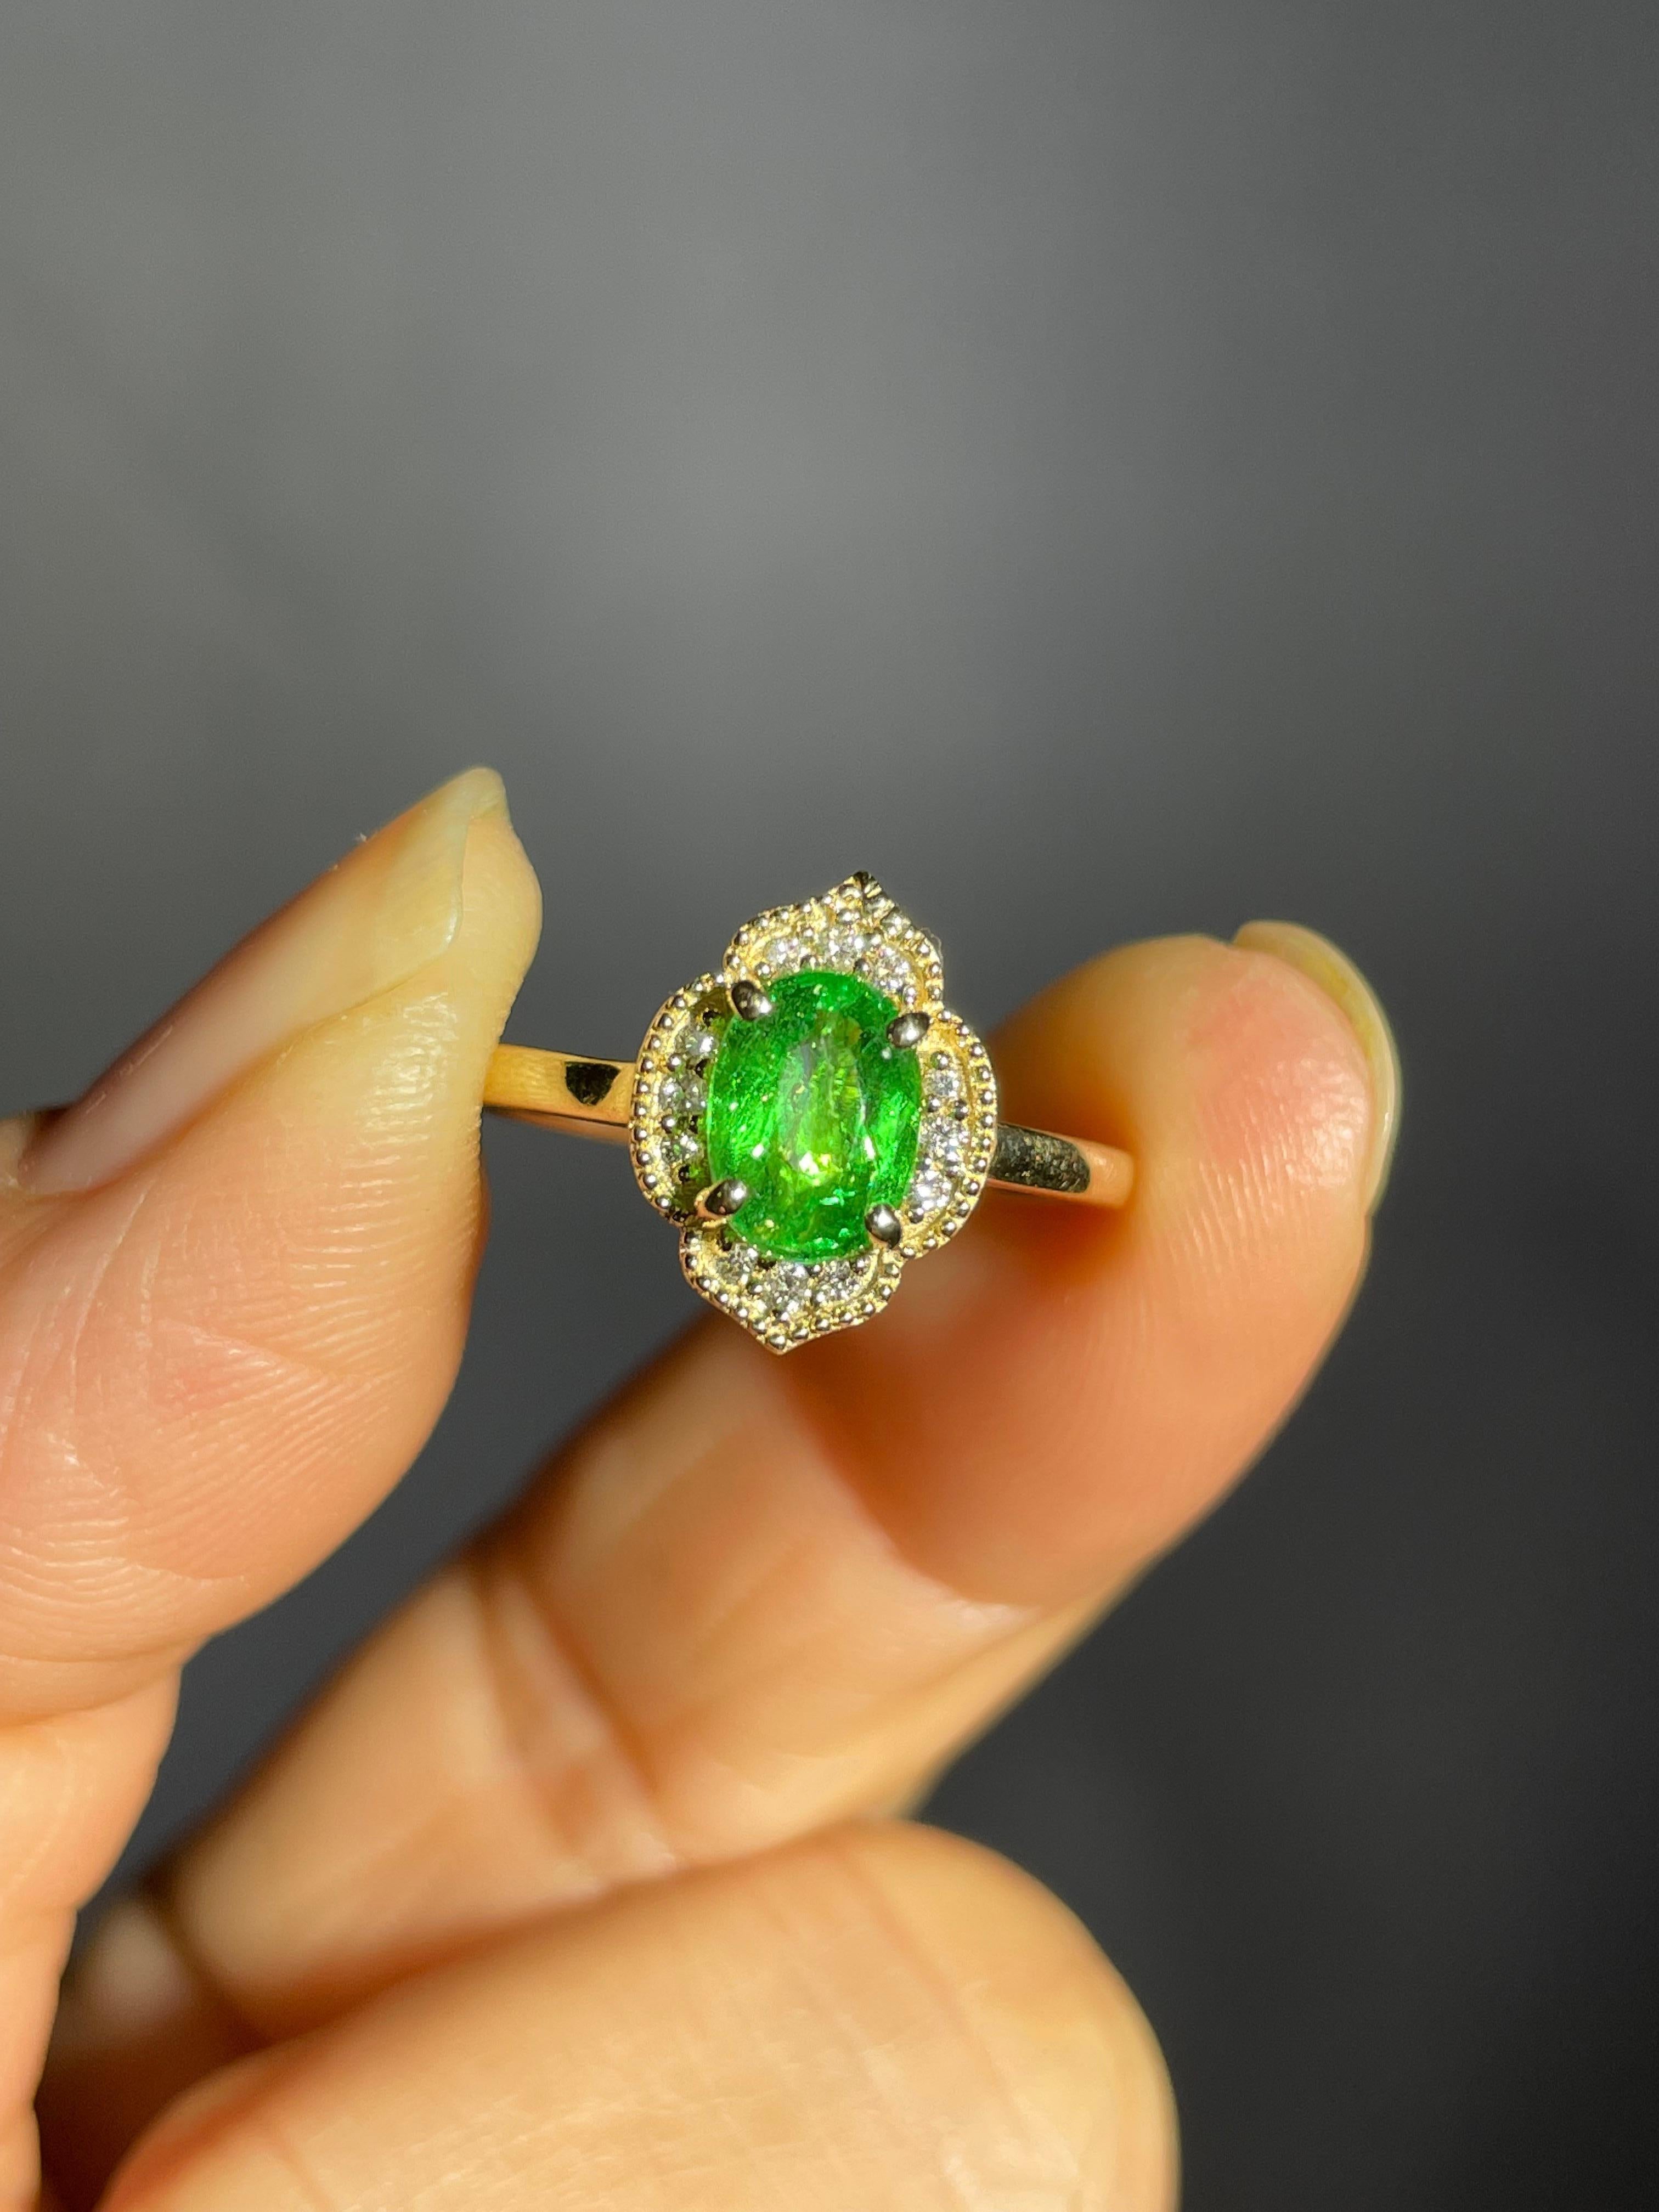 This Edwardian style engagement ring features a Tsavorite Garnet that is close to the color of a pure green emerald. These green garnets are rare to find in sizes larger than 1 carat. 

Tsavorite Garnet qualities are eye clean, more durable and